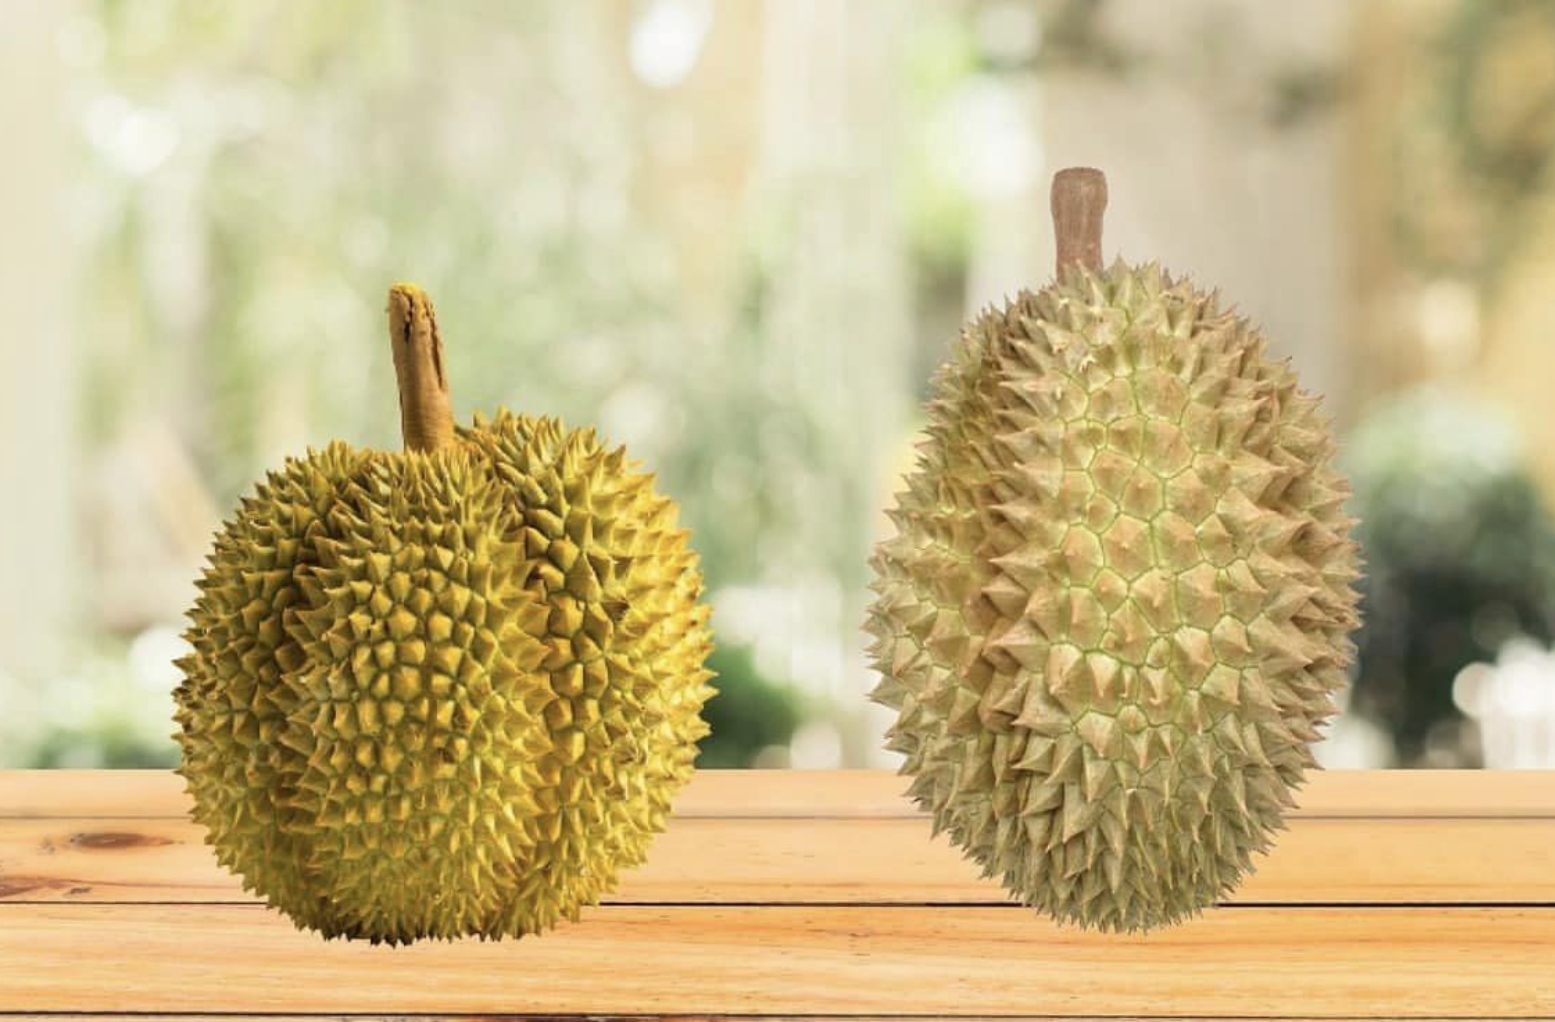 2 durians side by side: round looking durian vs oblong looking durian